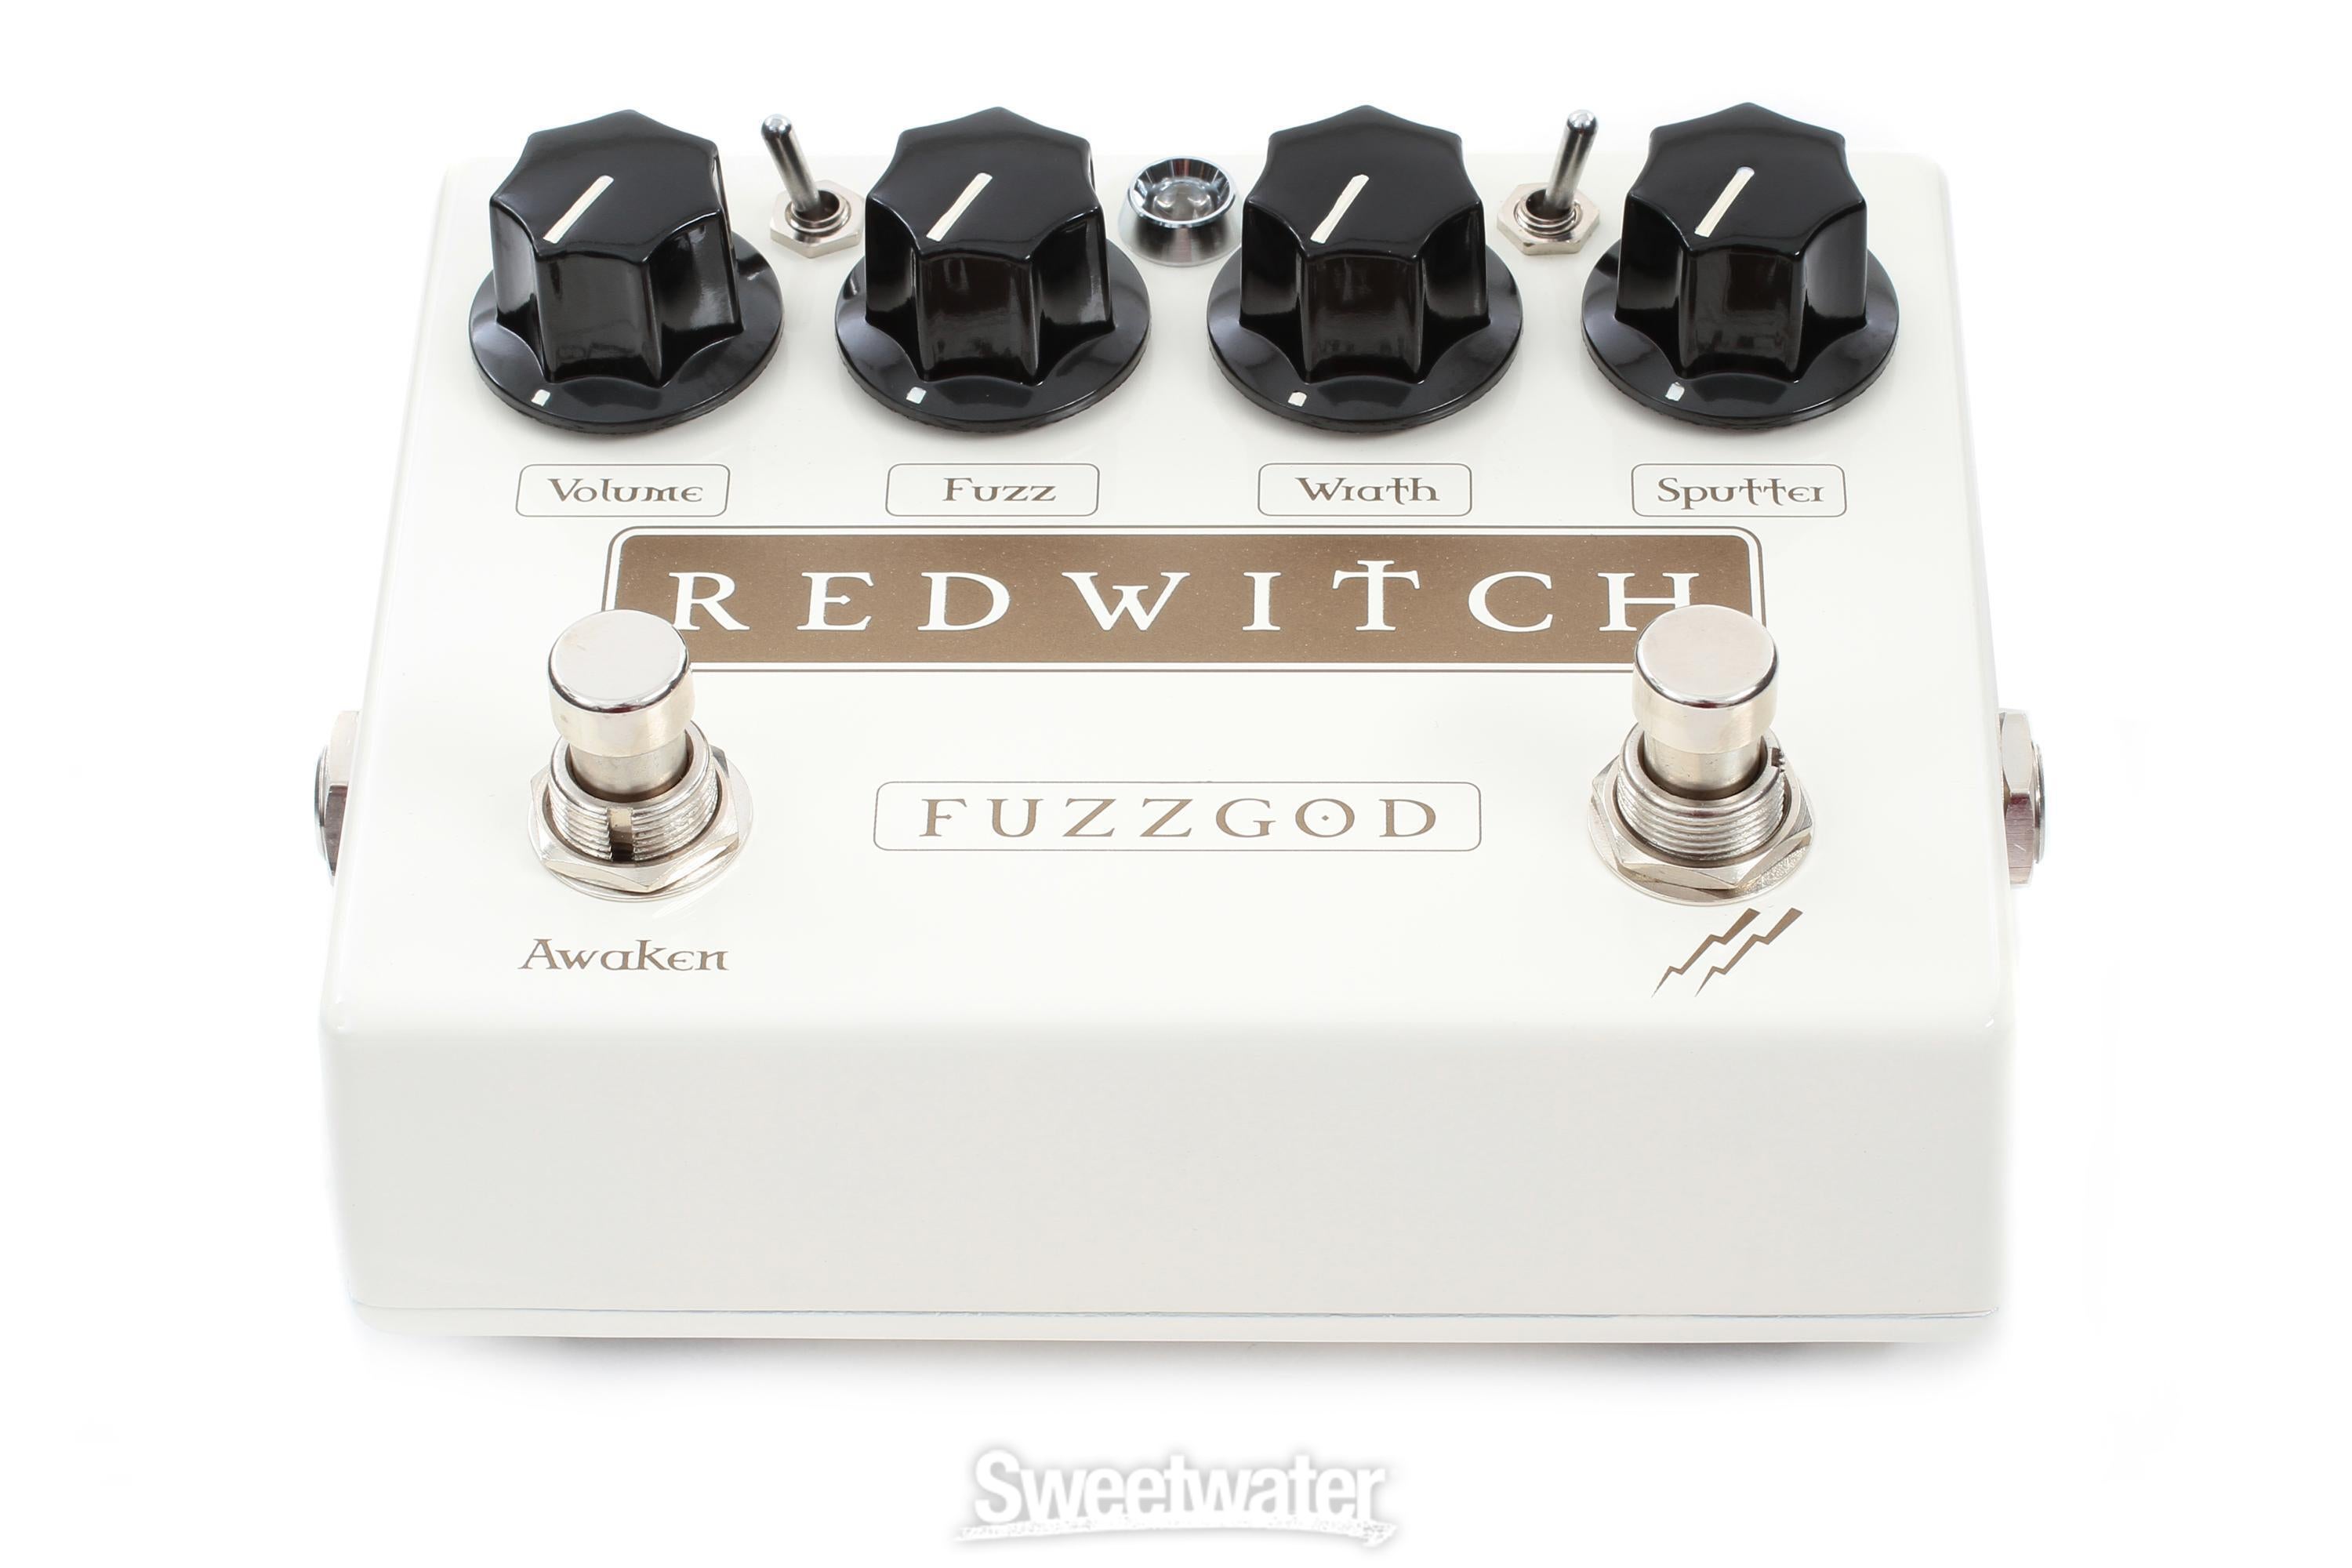 Red Witch Fuzz God II Fuzz Pedal Reviews | Sweetwater